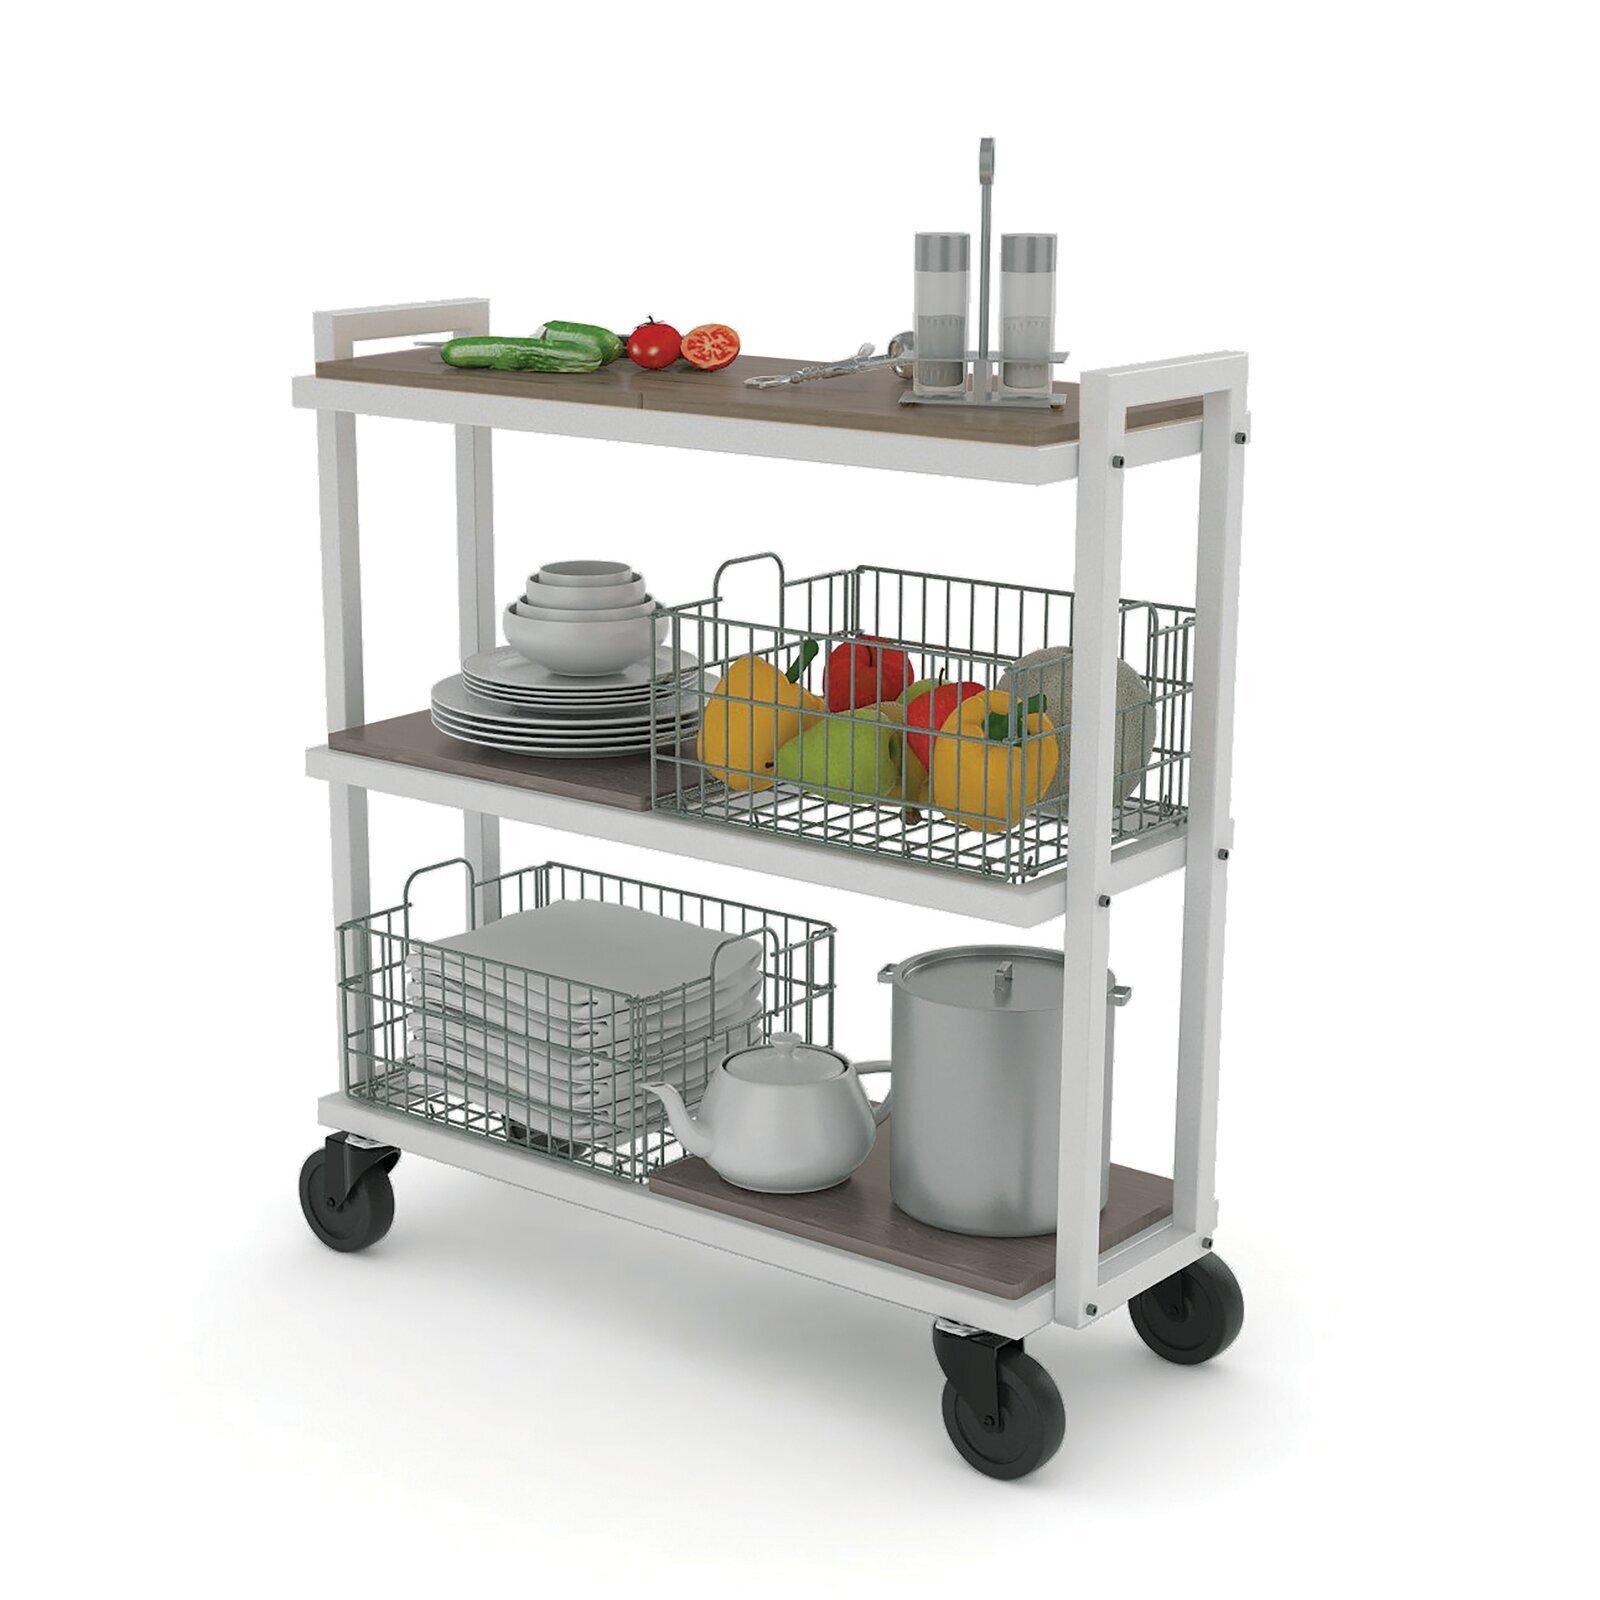 Narrow rolling stainless steel cart